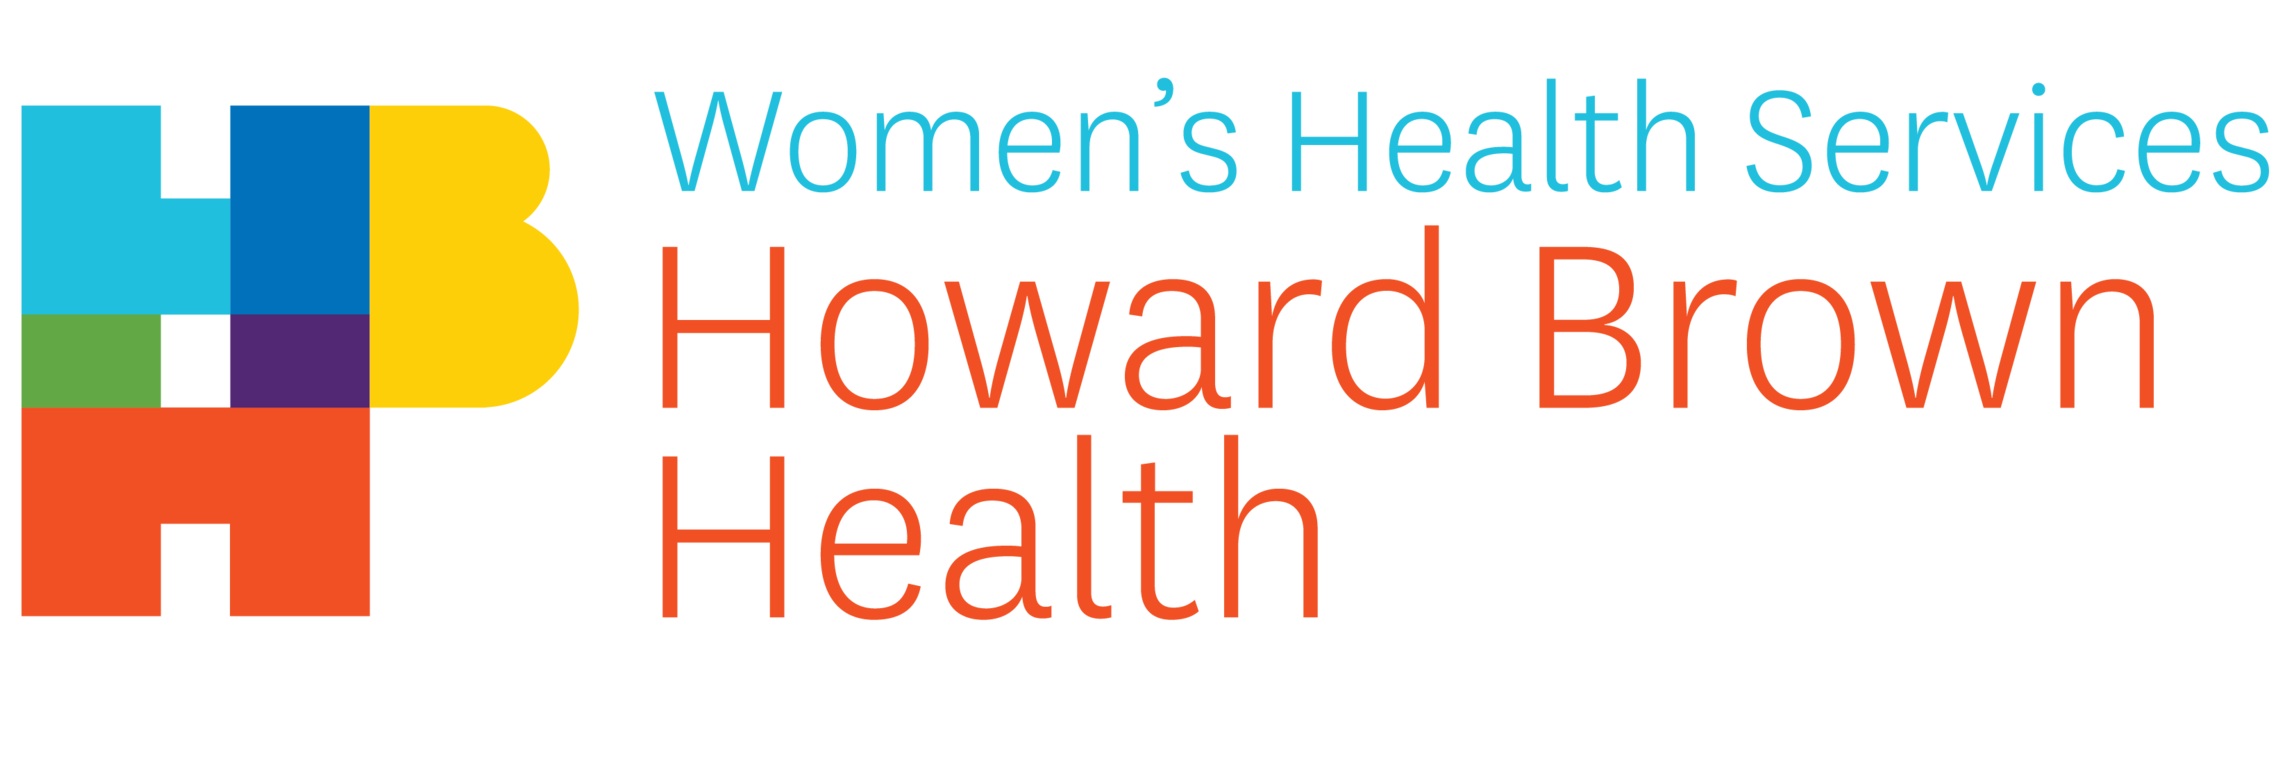 Howard Brown Health Women's Services